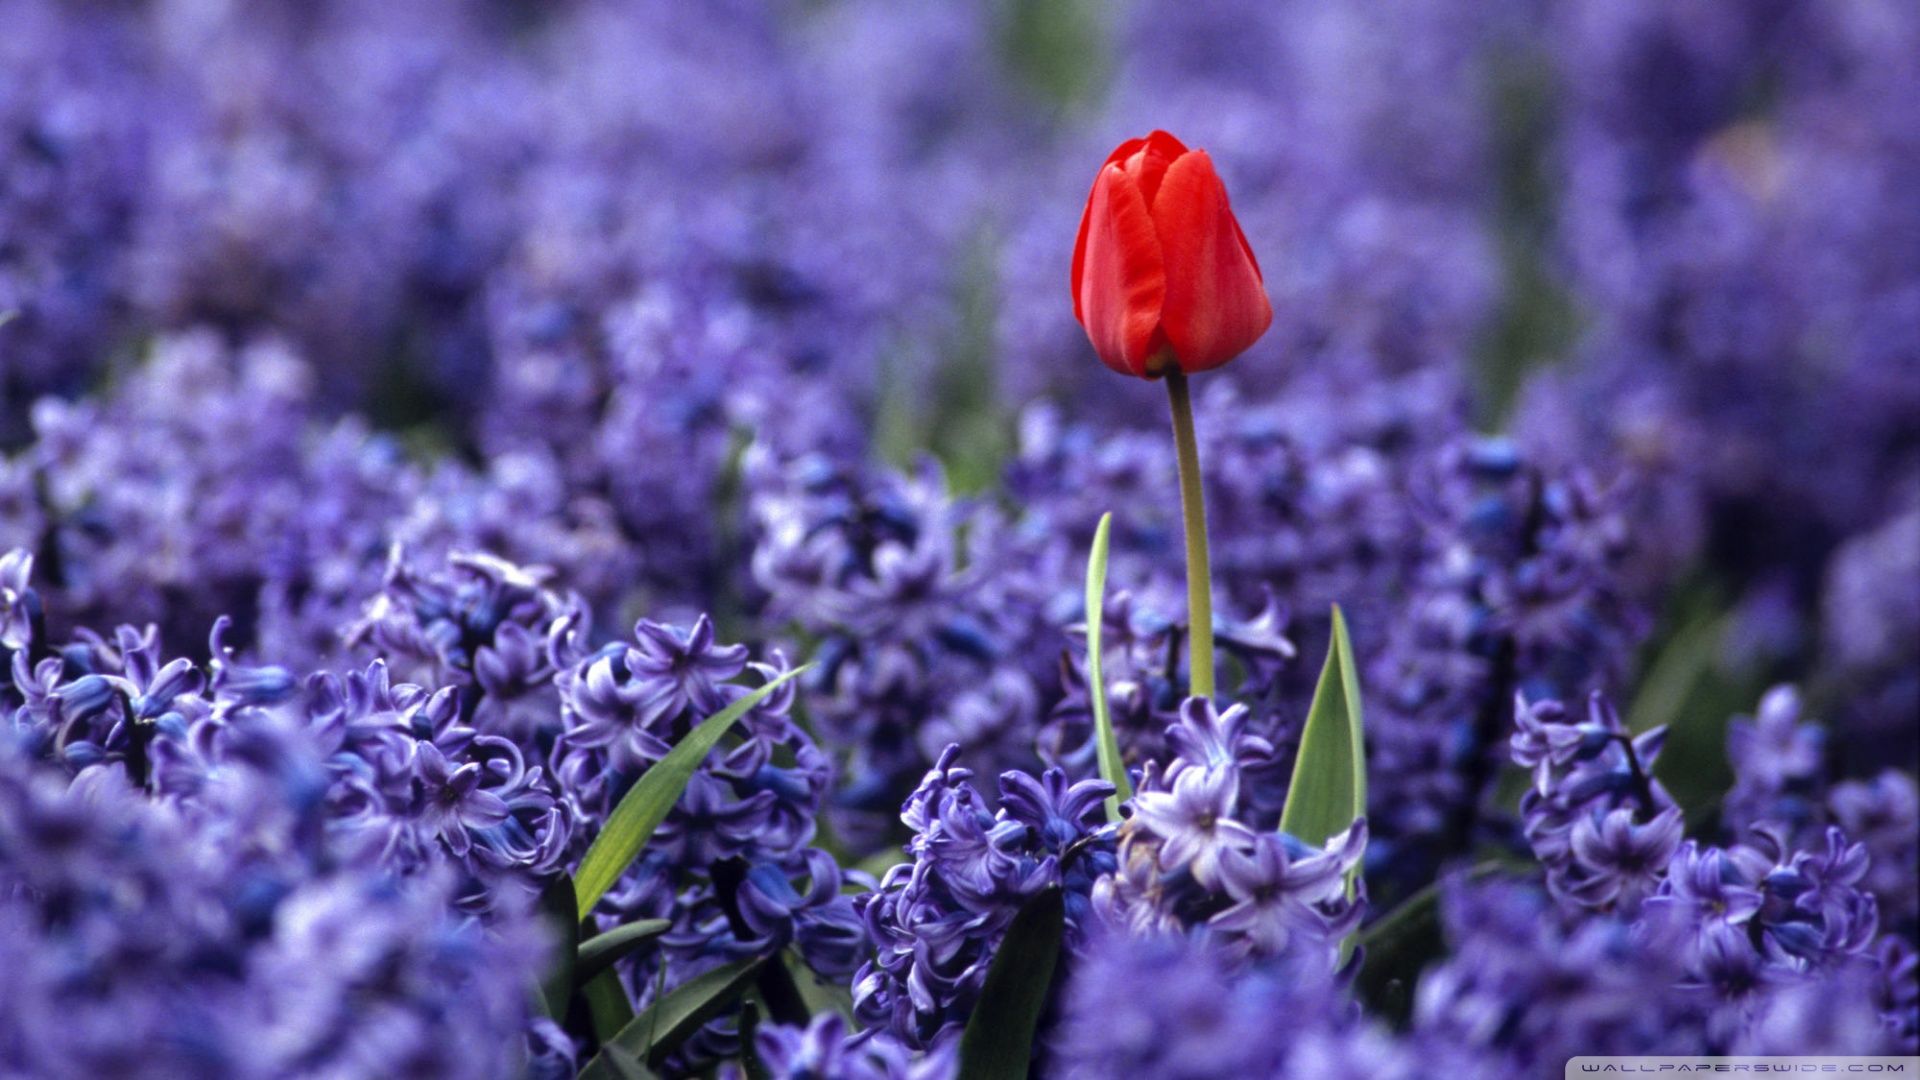 Download Red Tulip And Hyacinths Wallpaper 1920x1080